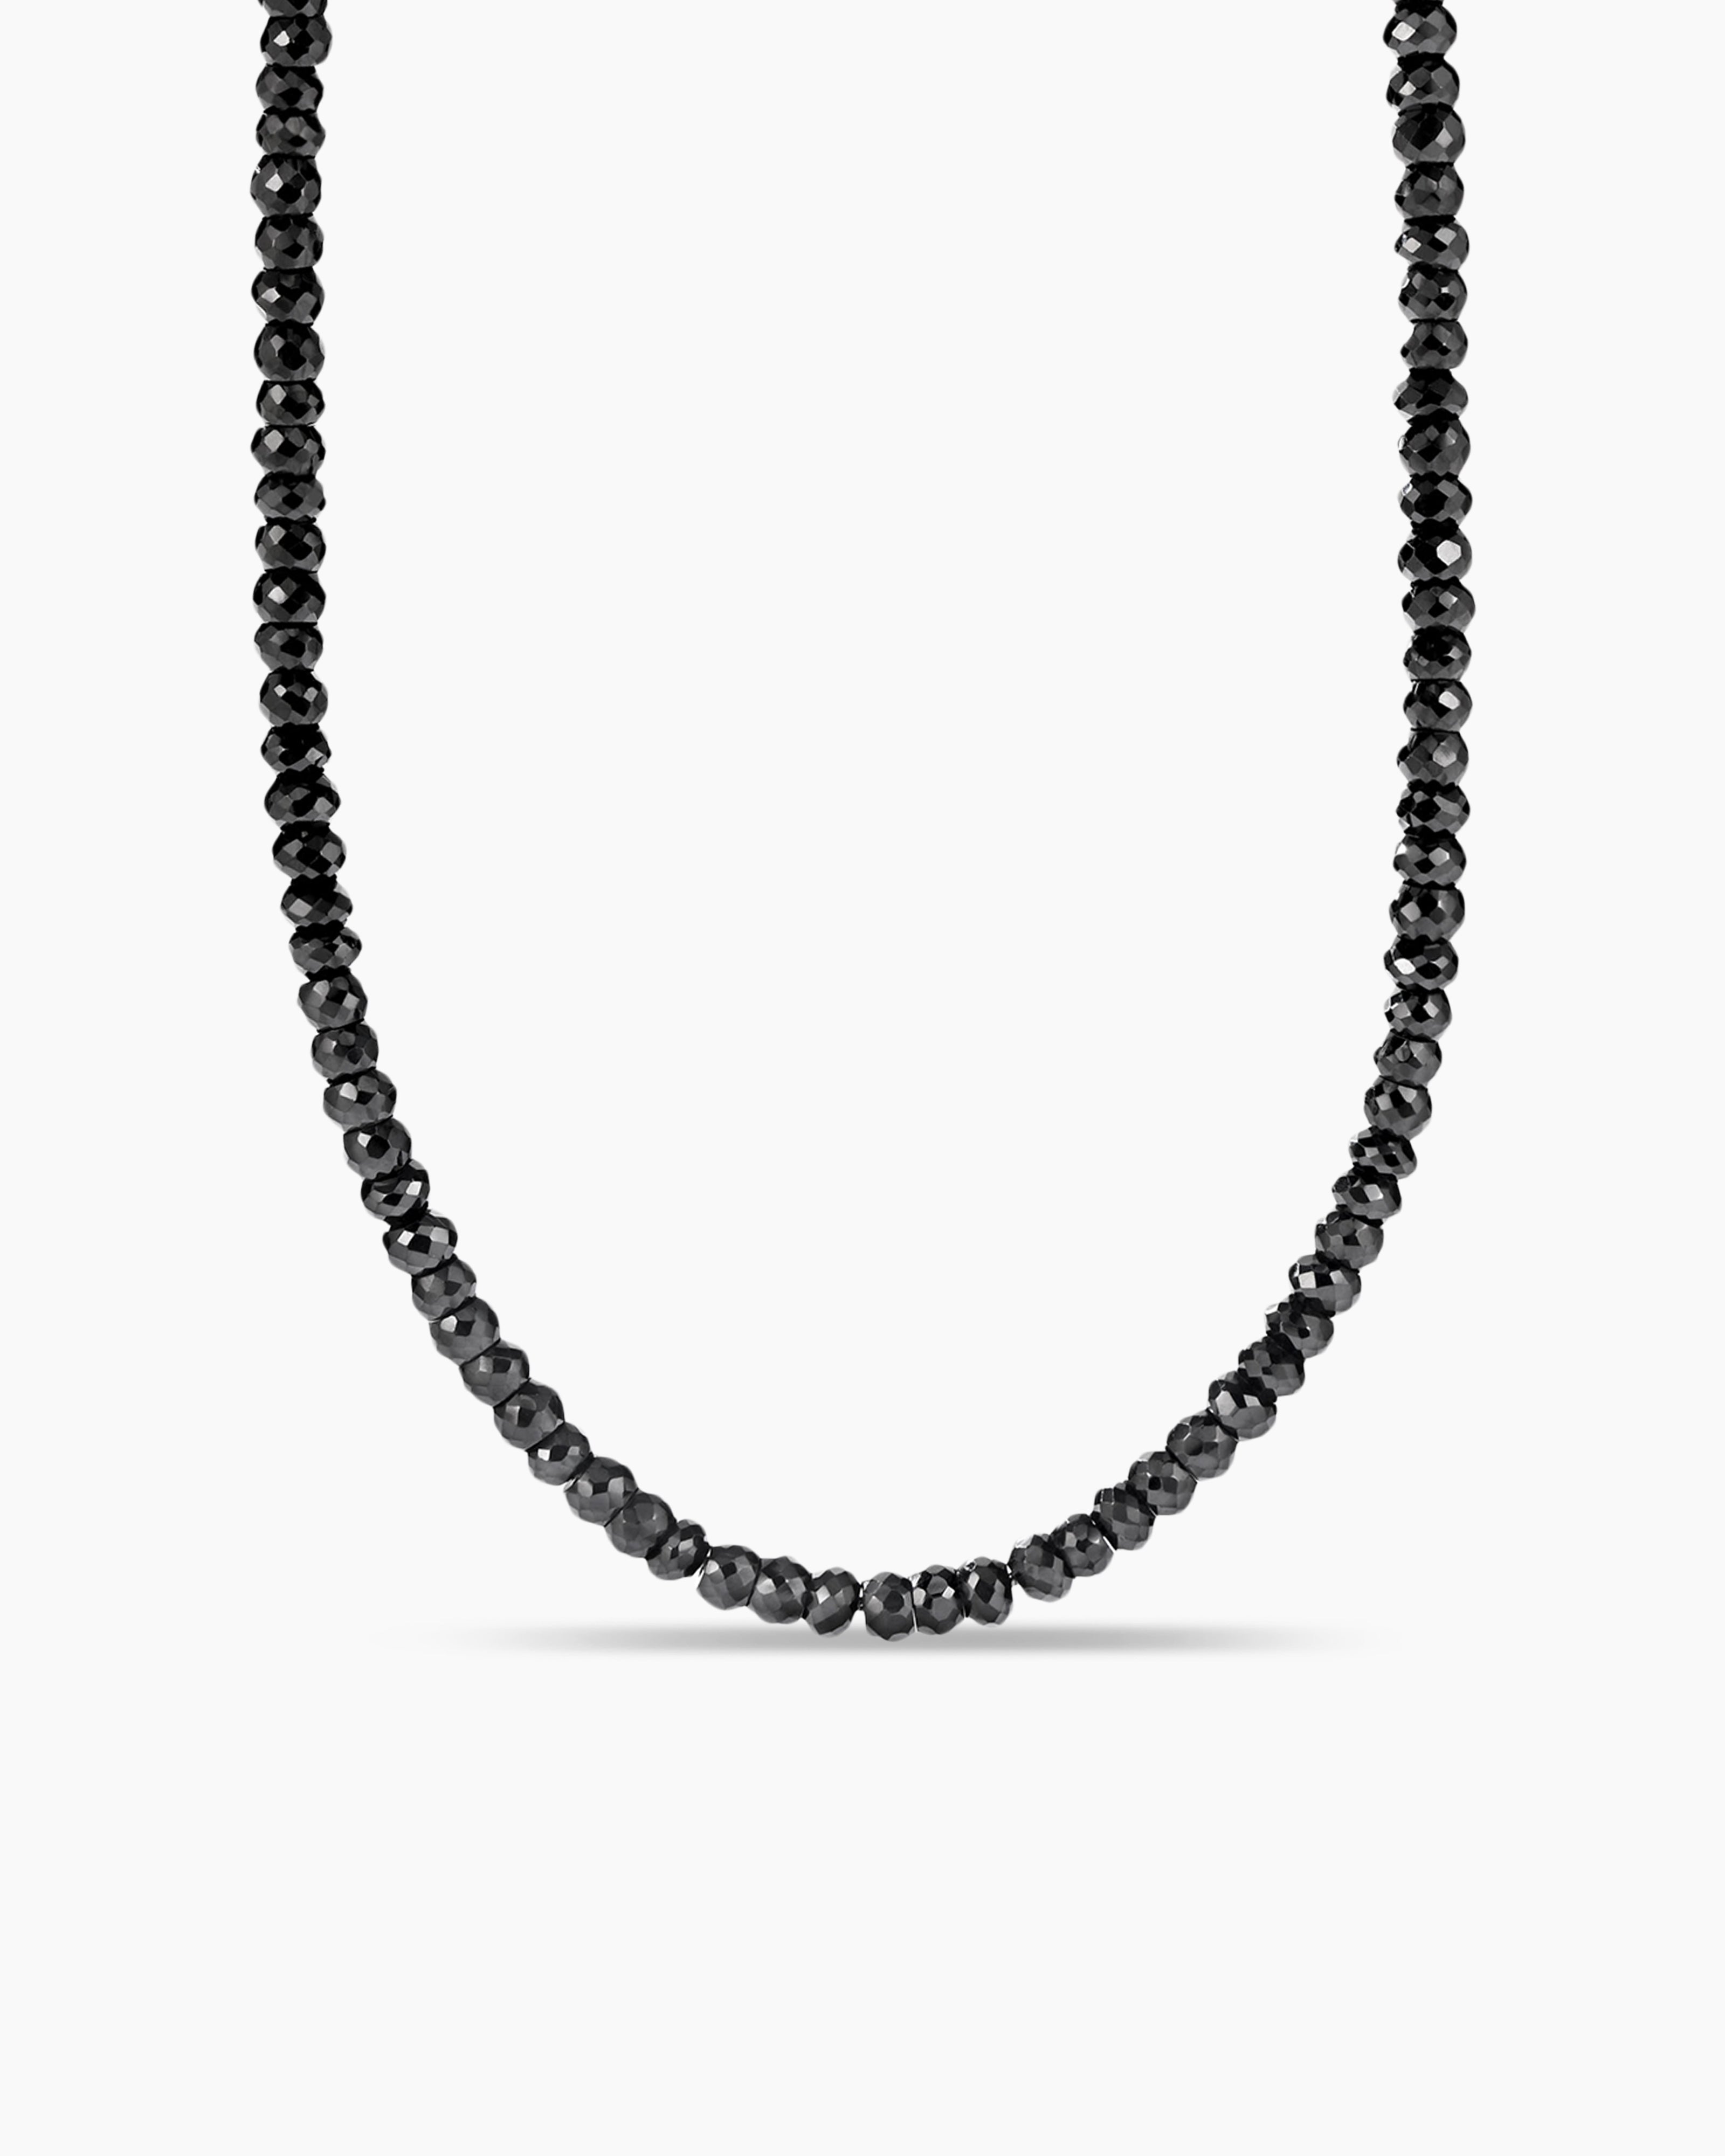 Pavé Clover and Black Spinel Necklace – Devon Road Jewelry